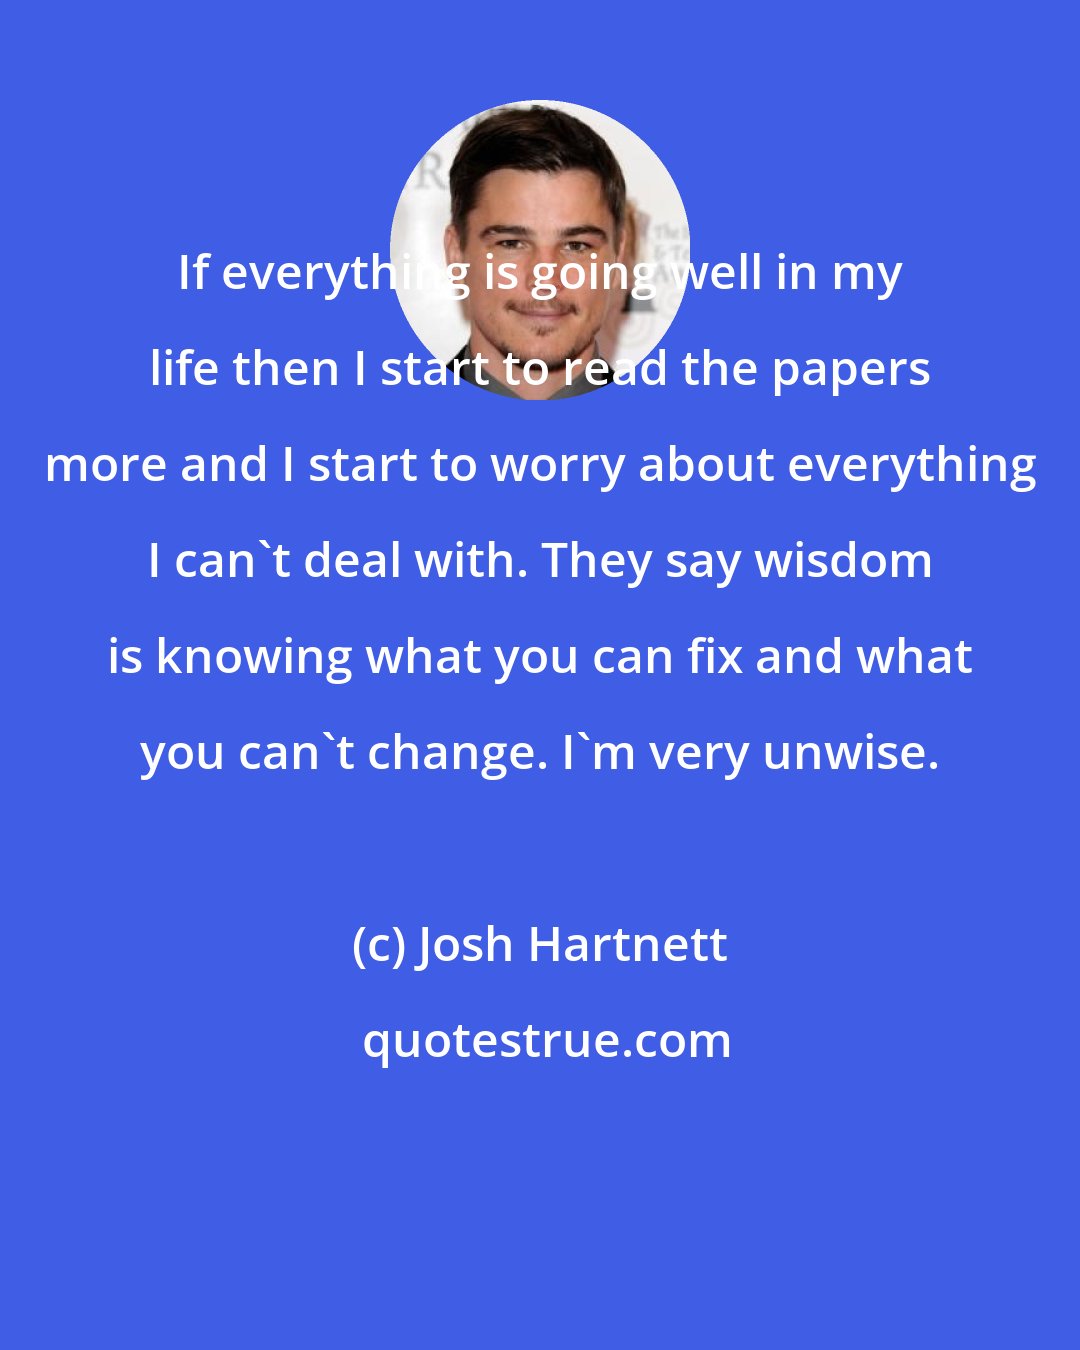 Josh Hartnett: If everything is going well in my life then I start to read the papers more and I start to worry about everything I can't deal with. They say wisdom is knowing what you can fix and what you can't change. I'm very unwise.